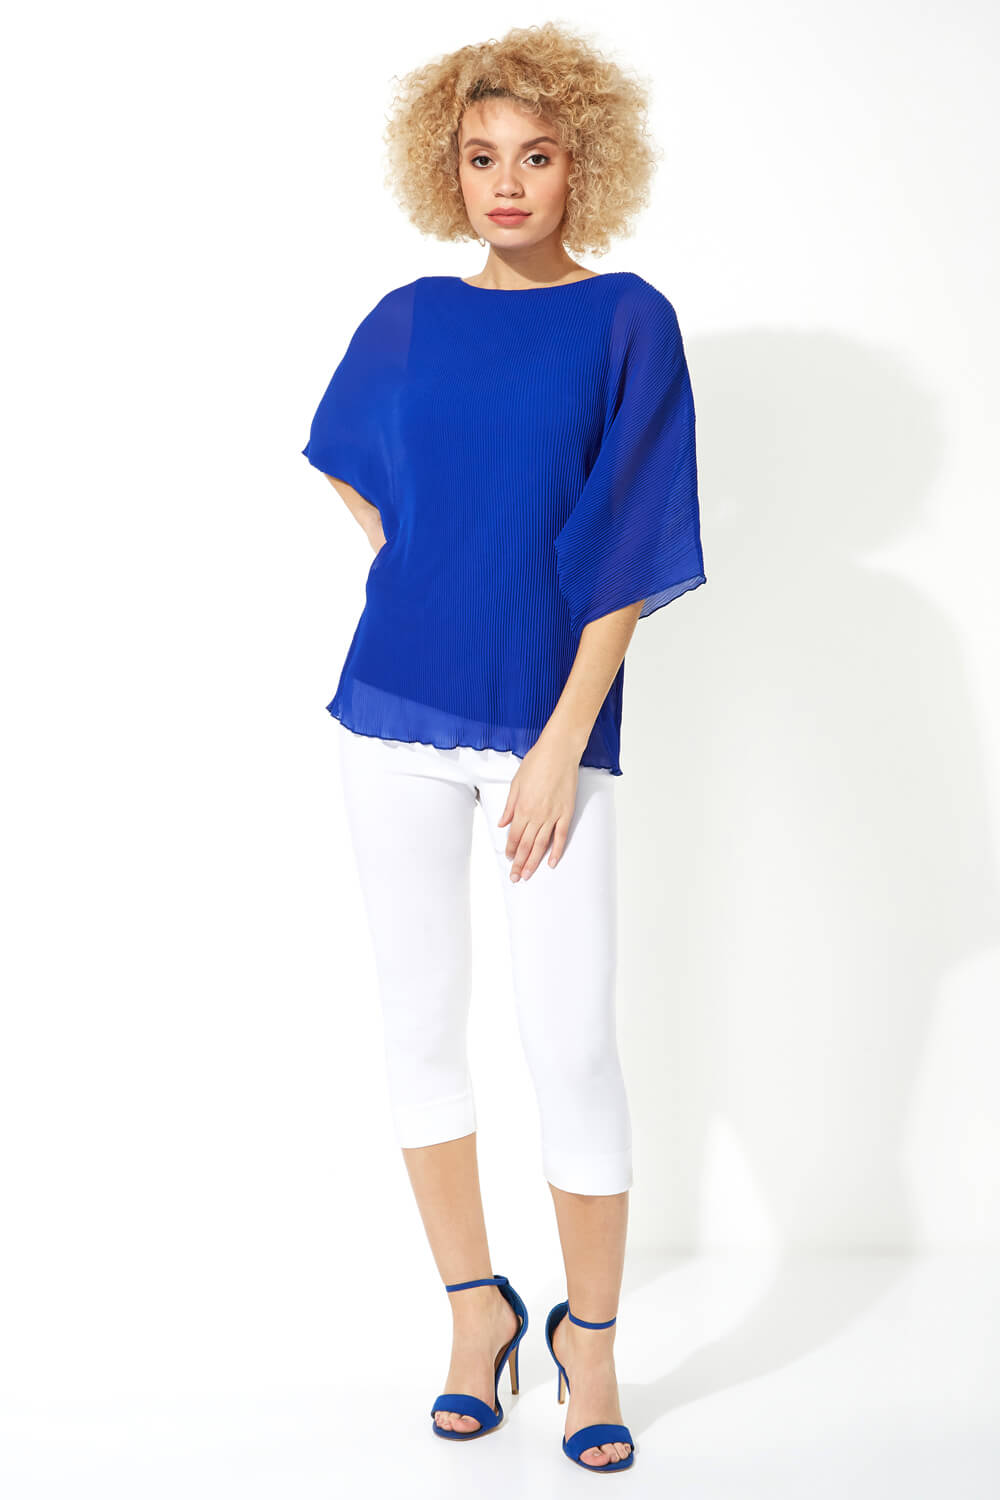 Royal Blue Pleated Chiffon Overlay Top, Image 2 of 8